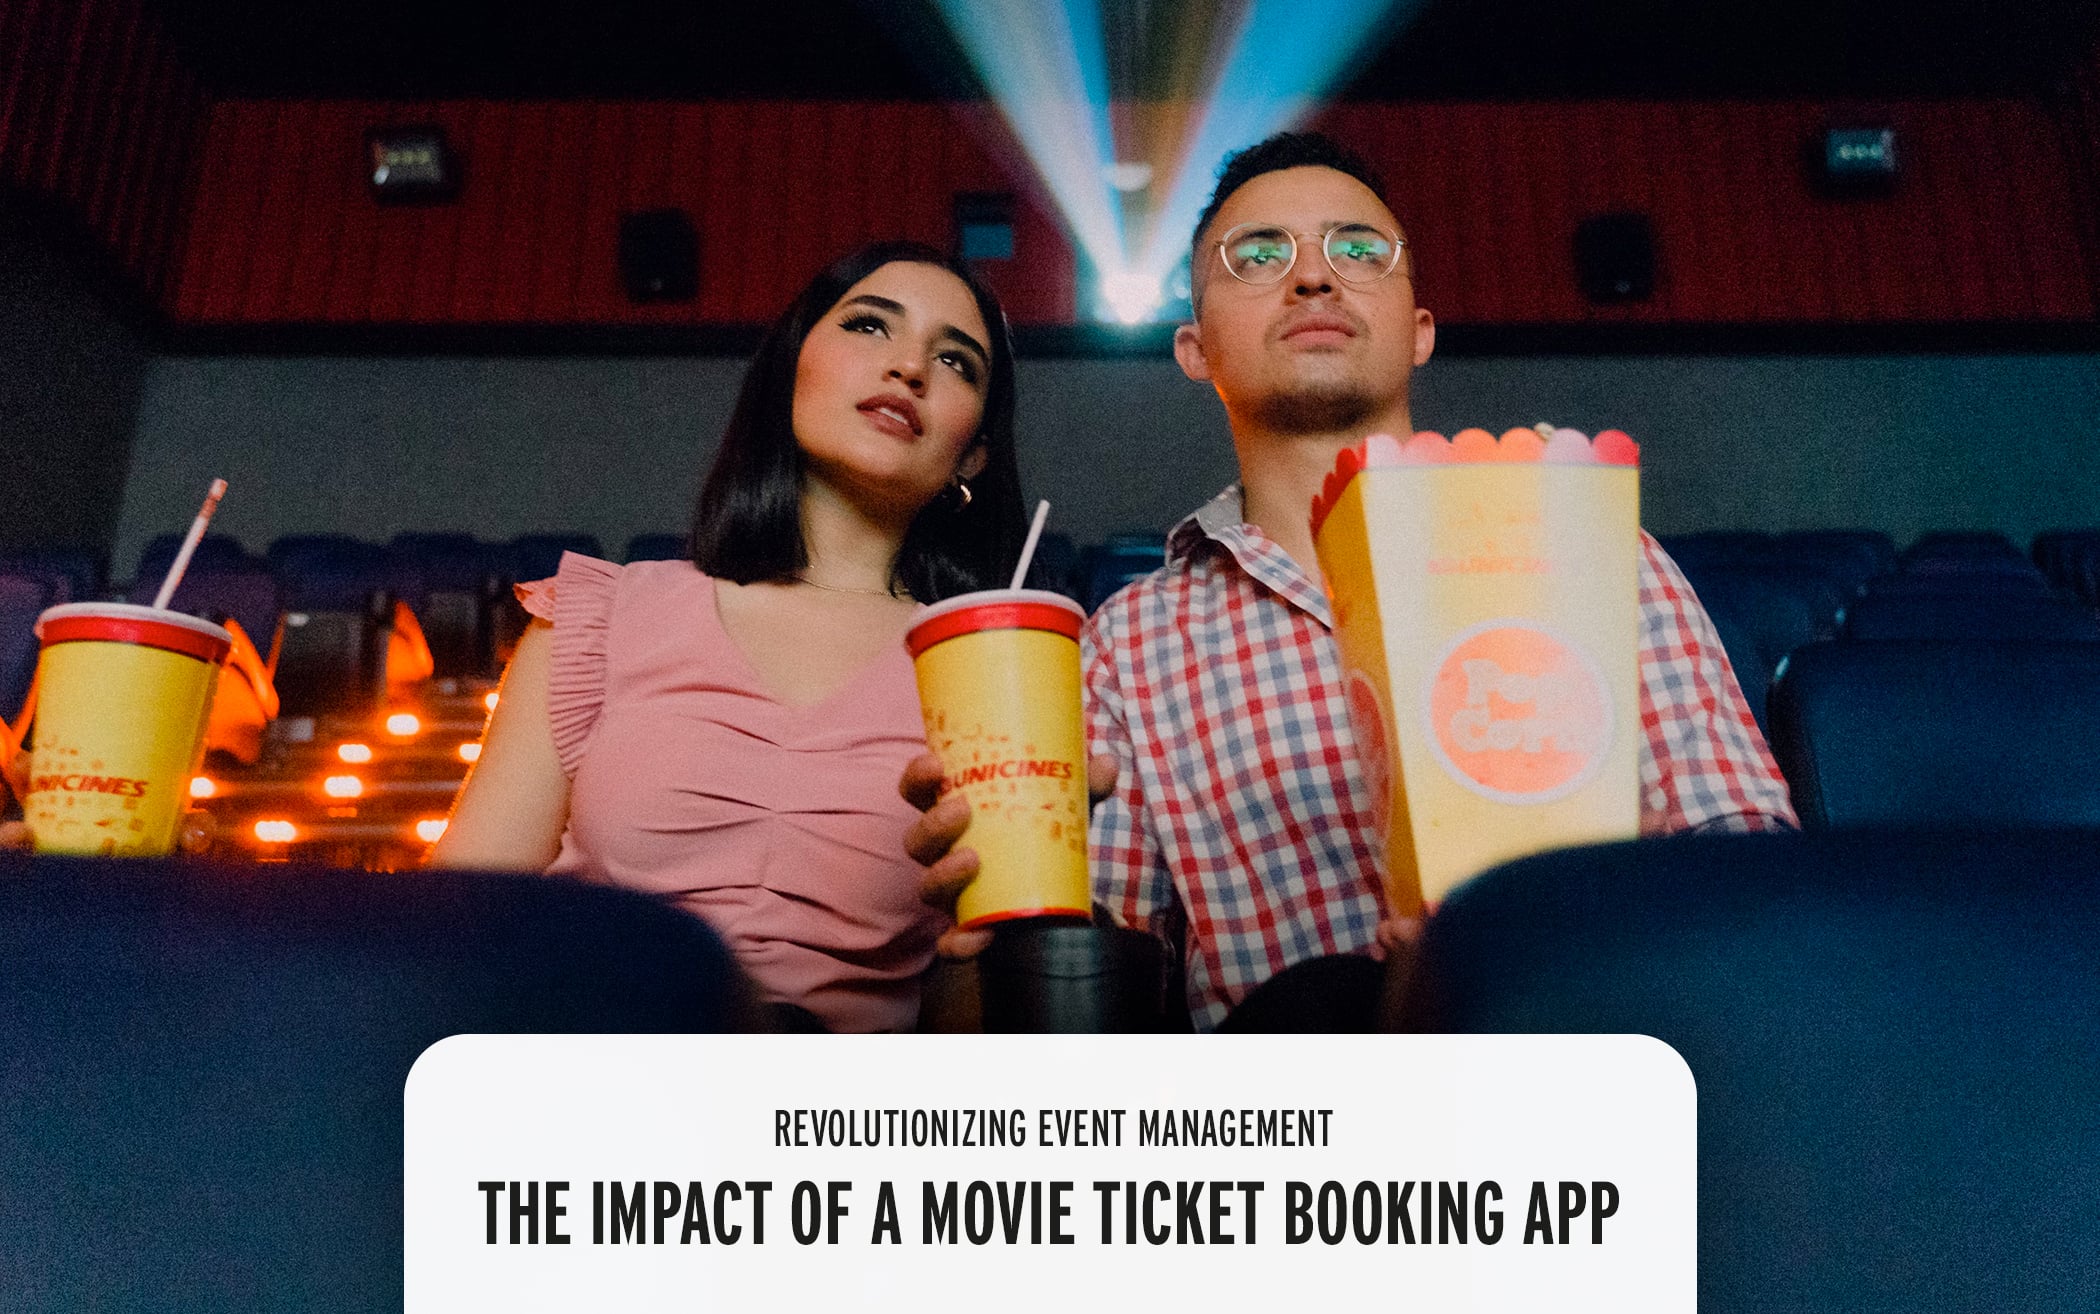 Revolutionizing Event Management: The Impact of a Movie Ticket Booking App